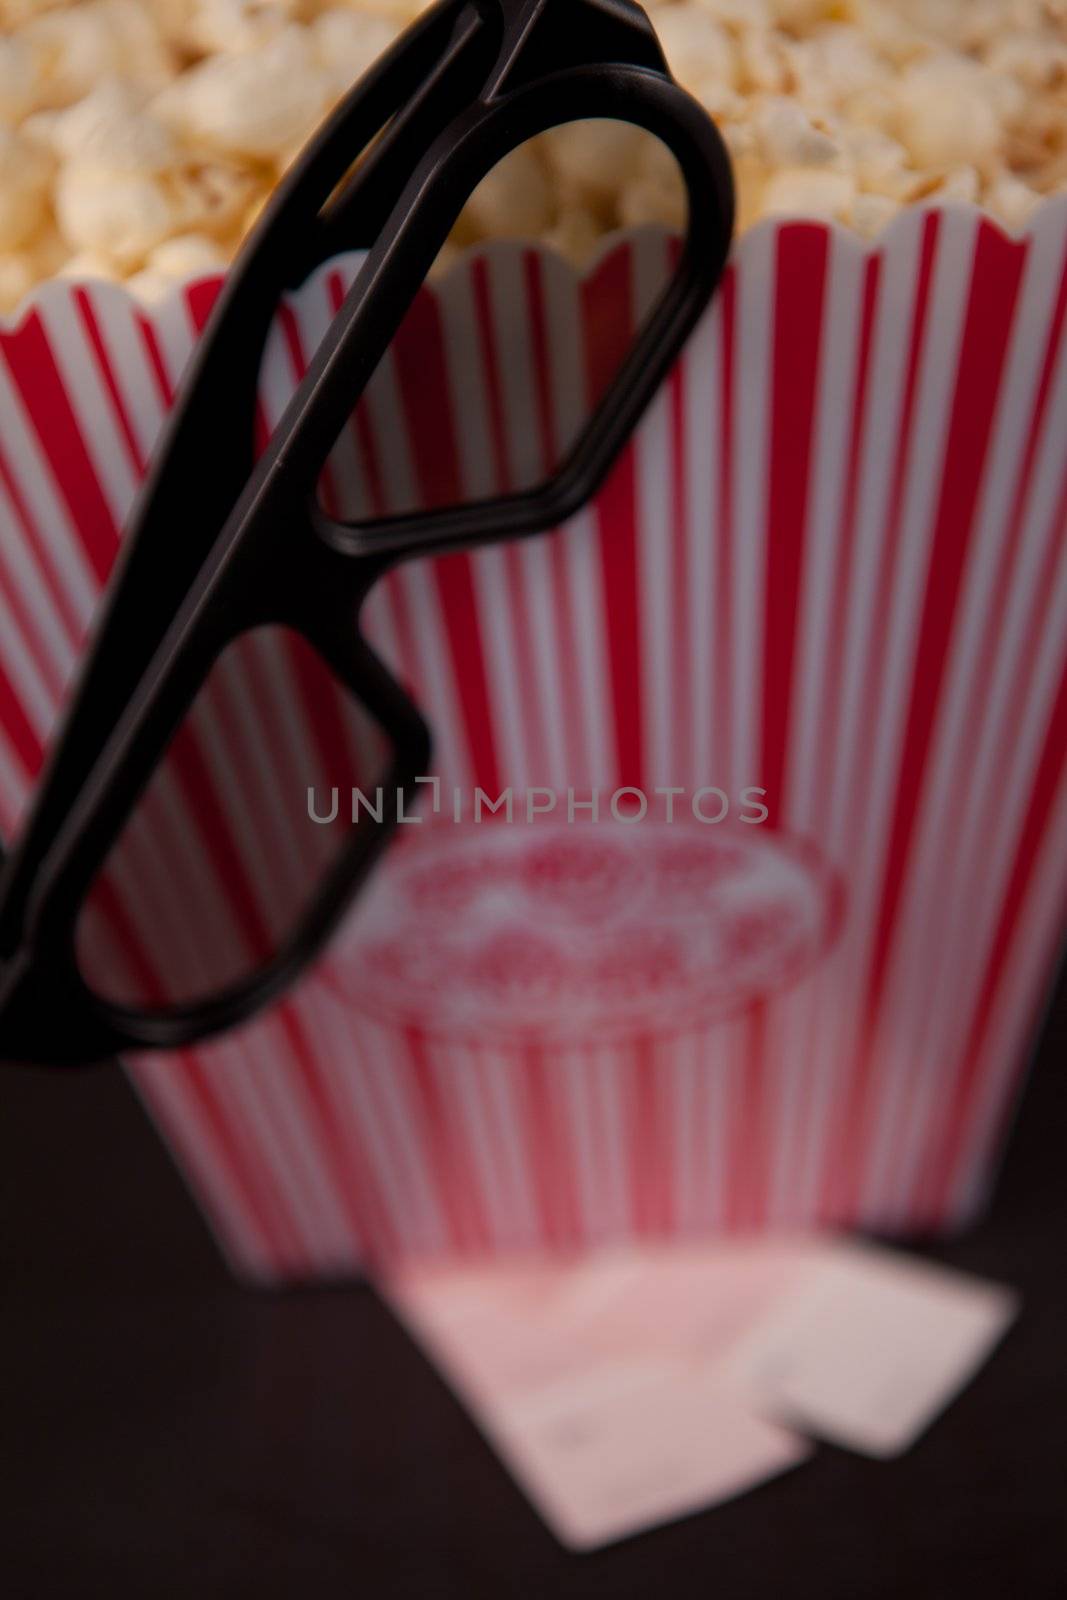 Glasses hanging on the edge of a box of pop corn standing on two tickets